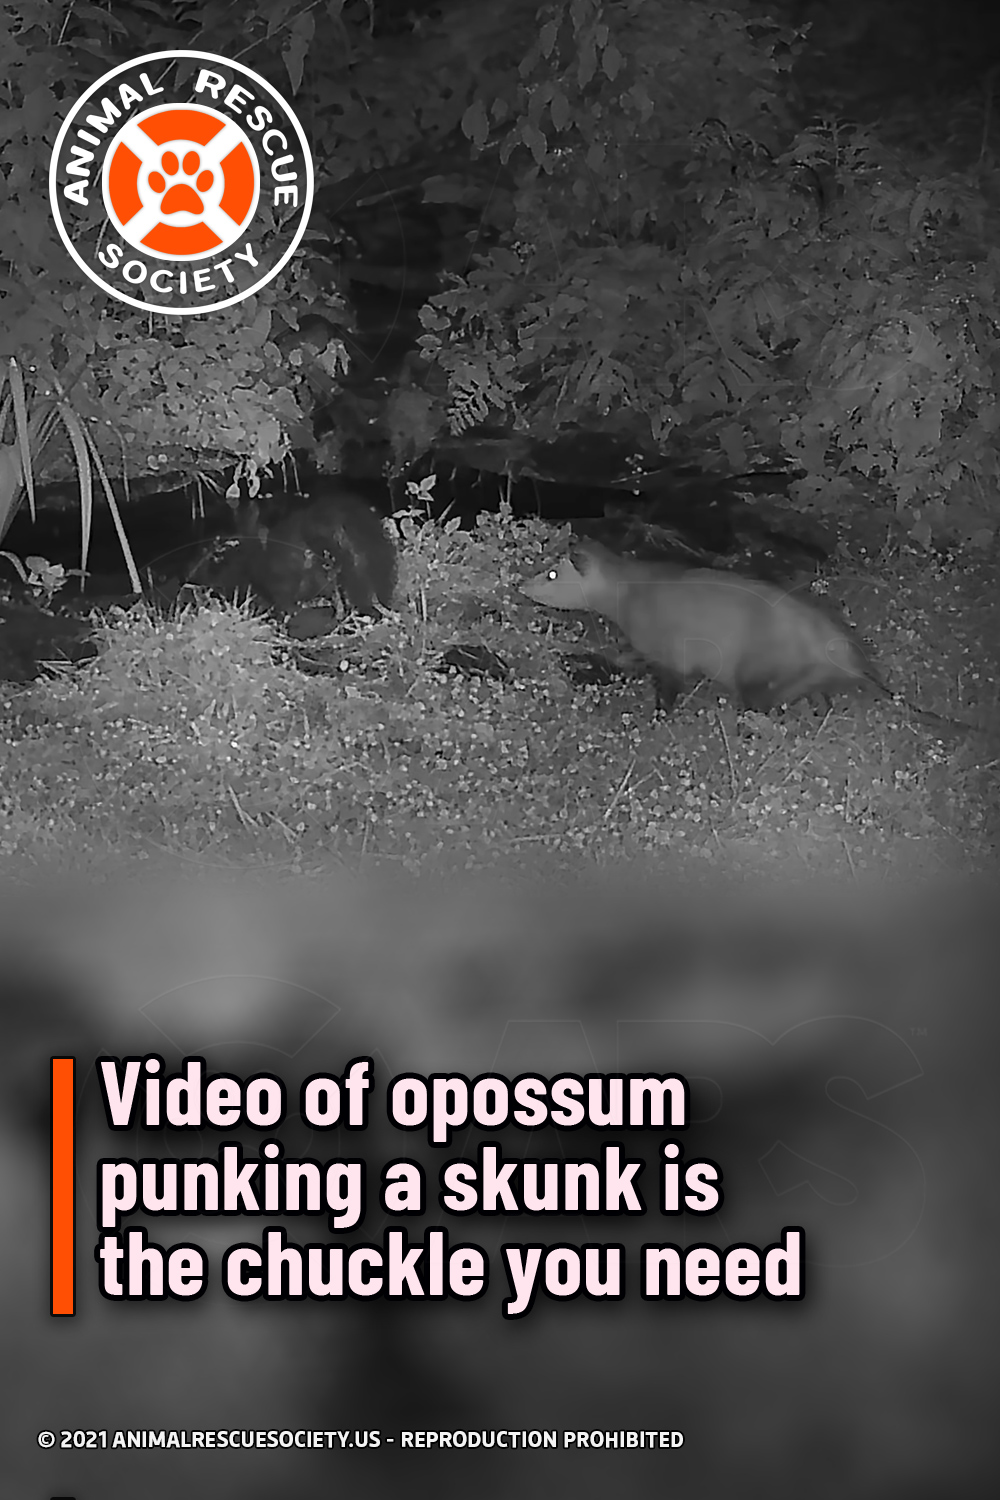 Video of opossum punking a skunk is the chuckle you need